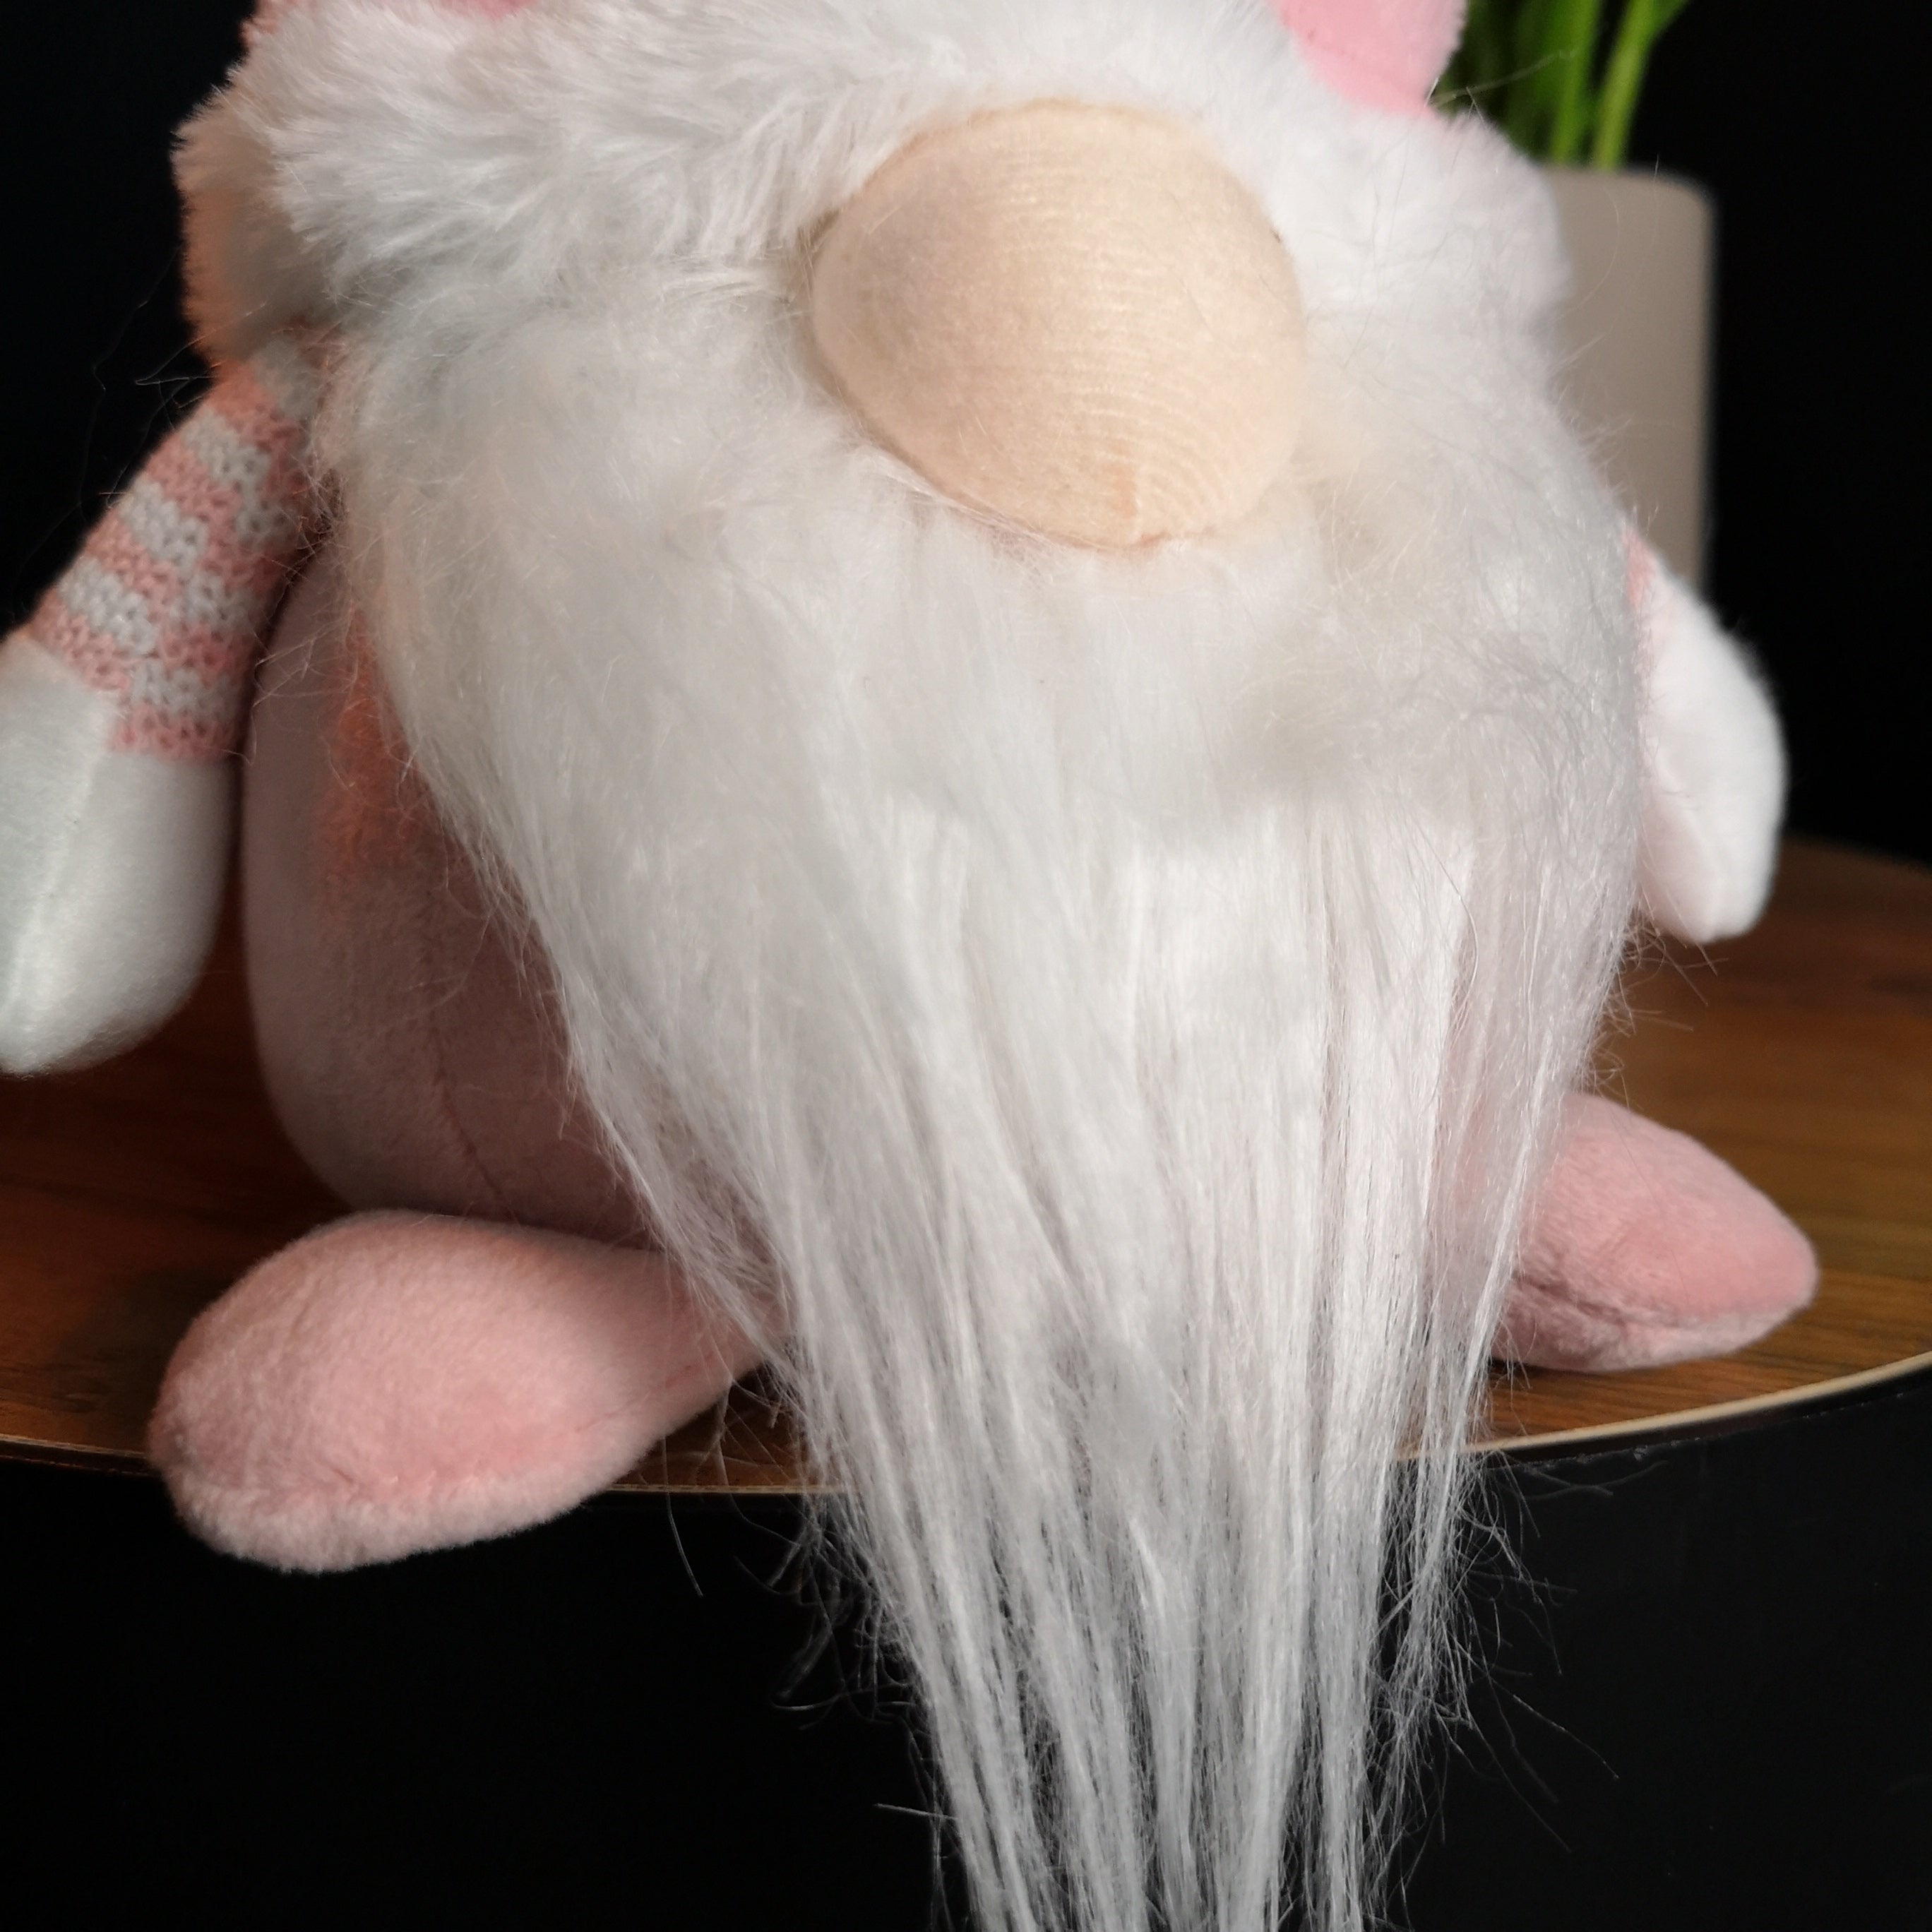 40cm Sitting Plush Christmas Gonk with Grooved Hat in Pink